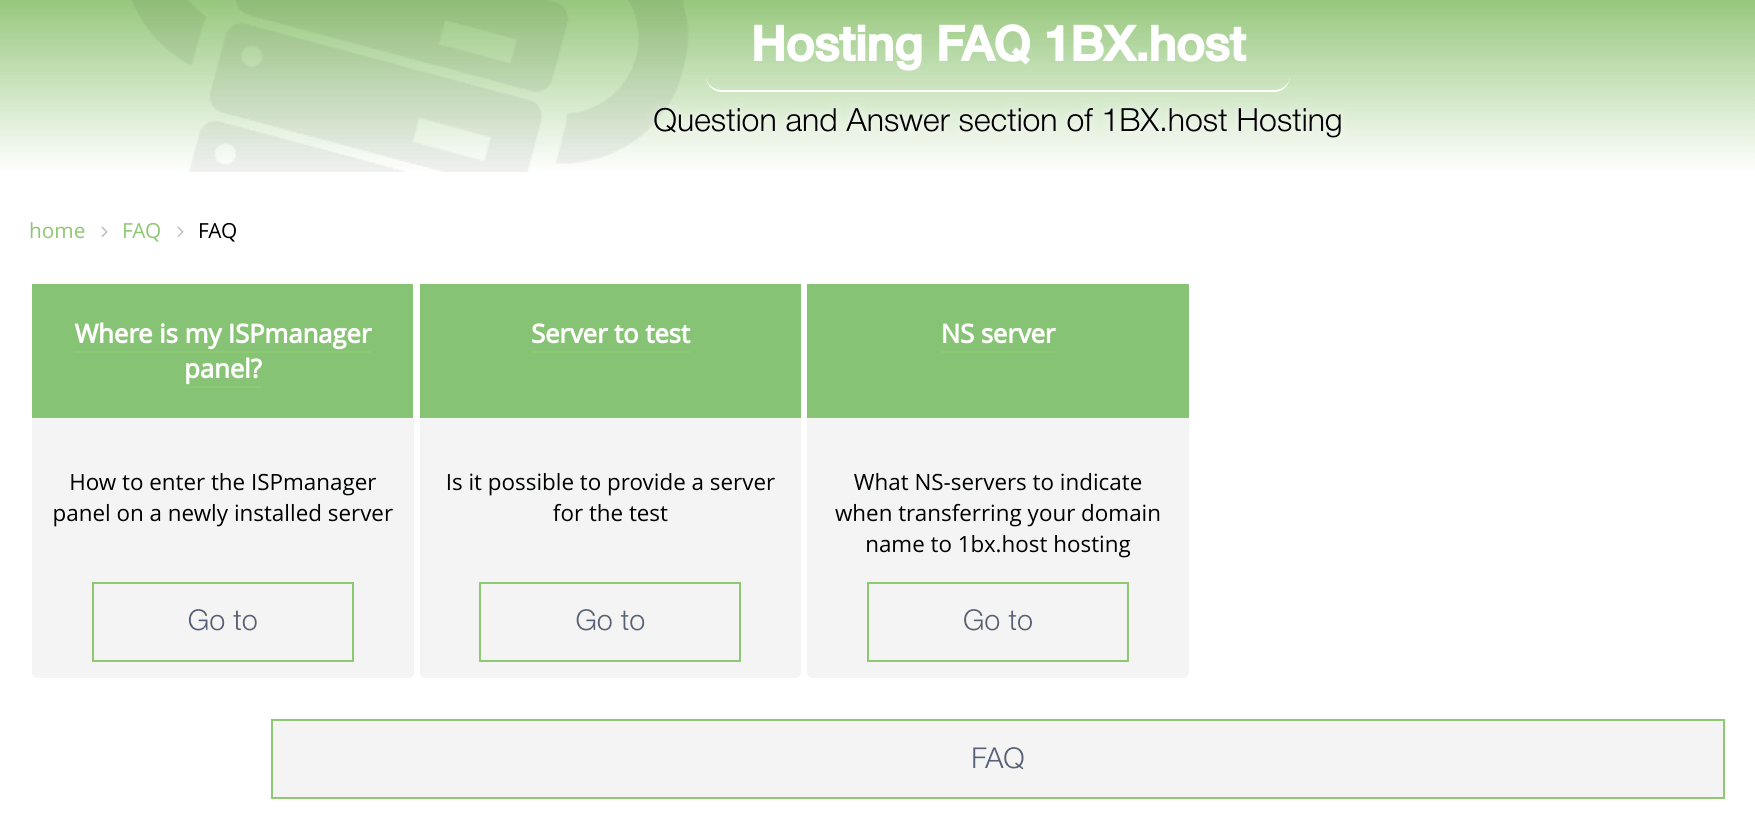 1BX.host Support